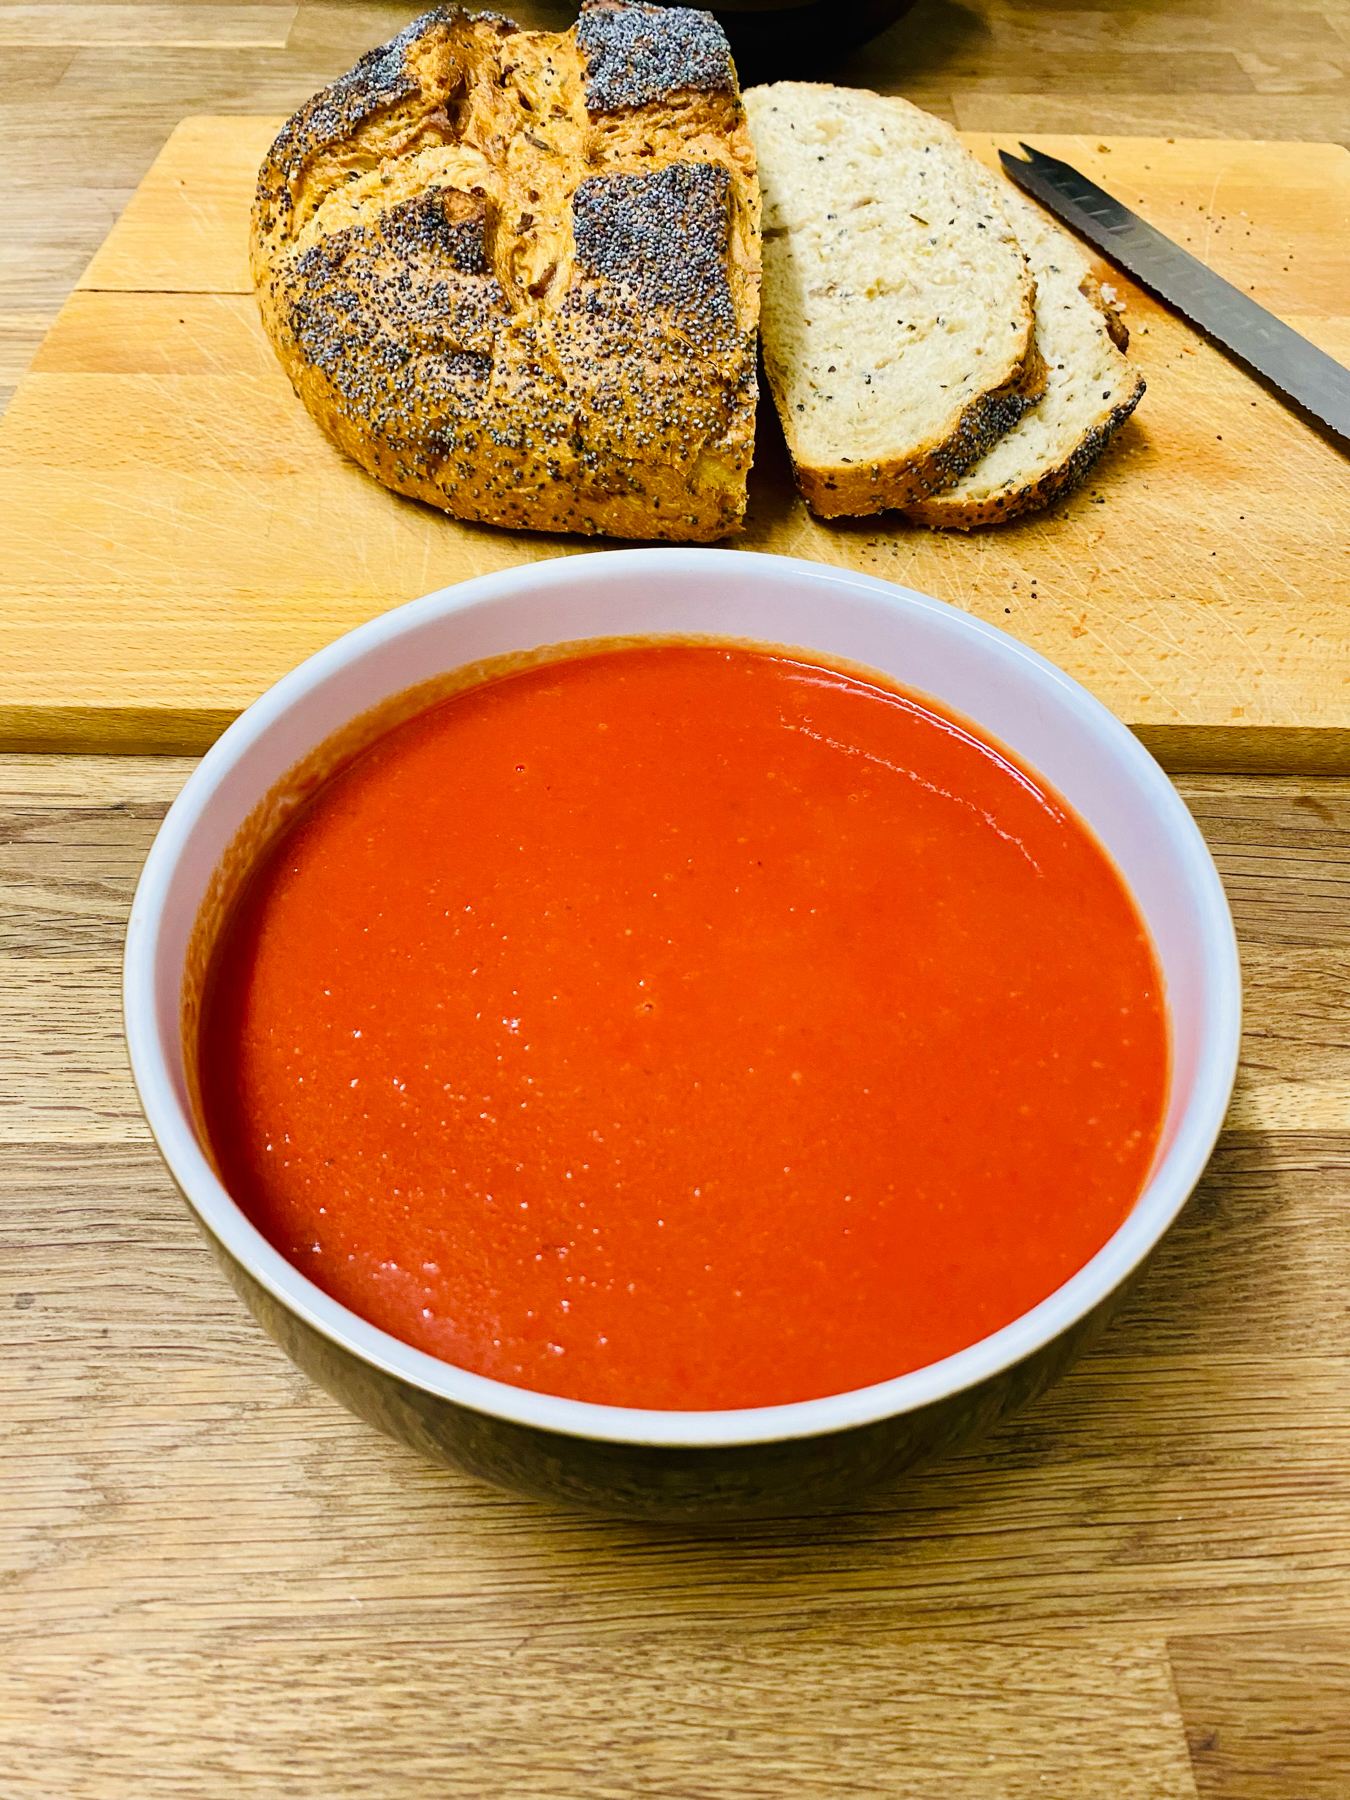 A bowl of soup with sliced multigrain bread and a whole loaf topped with poppy seeds on a wooden cutting board next to a knife.